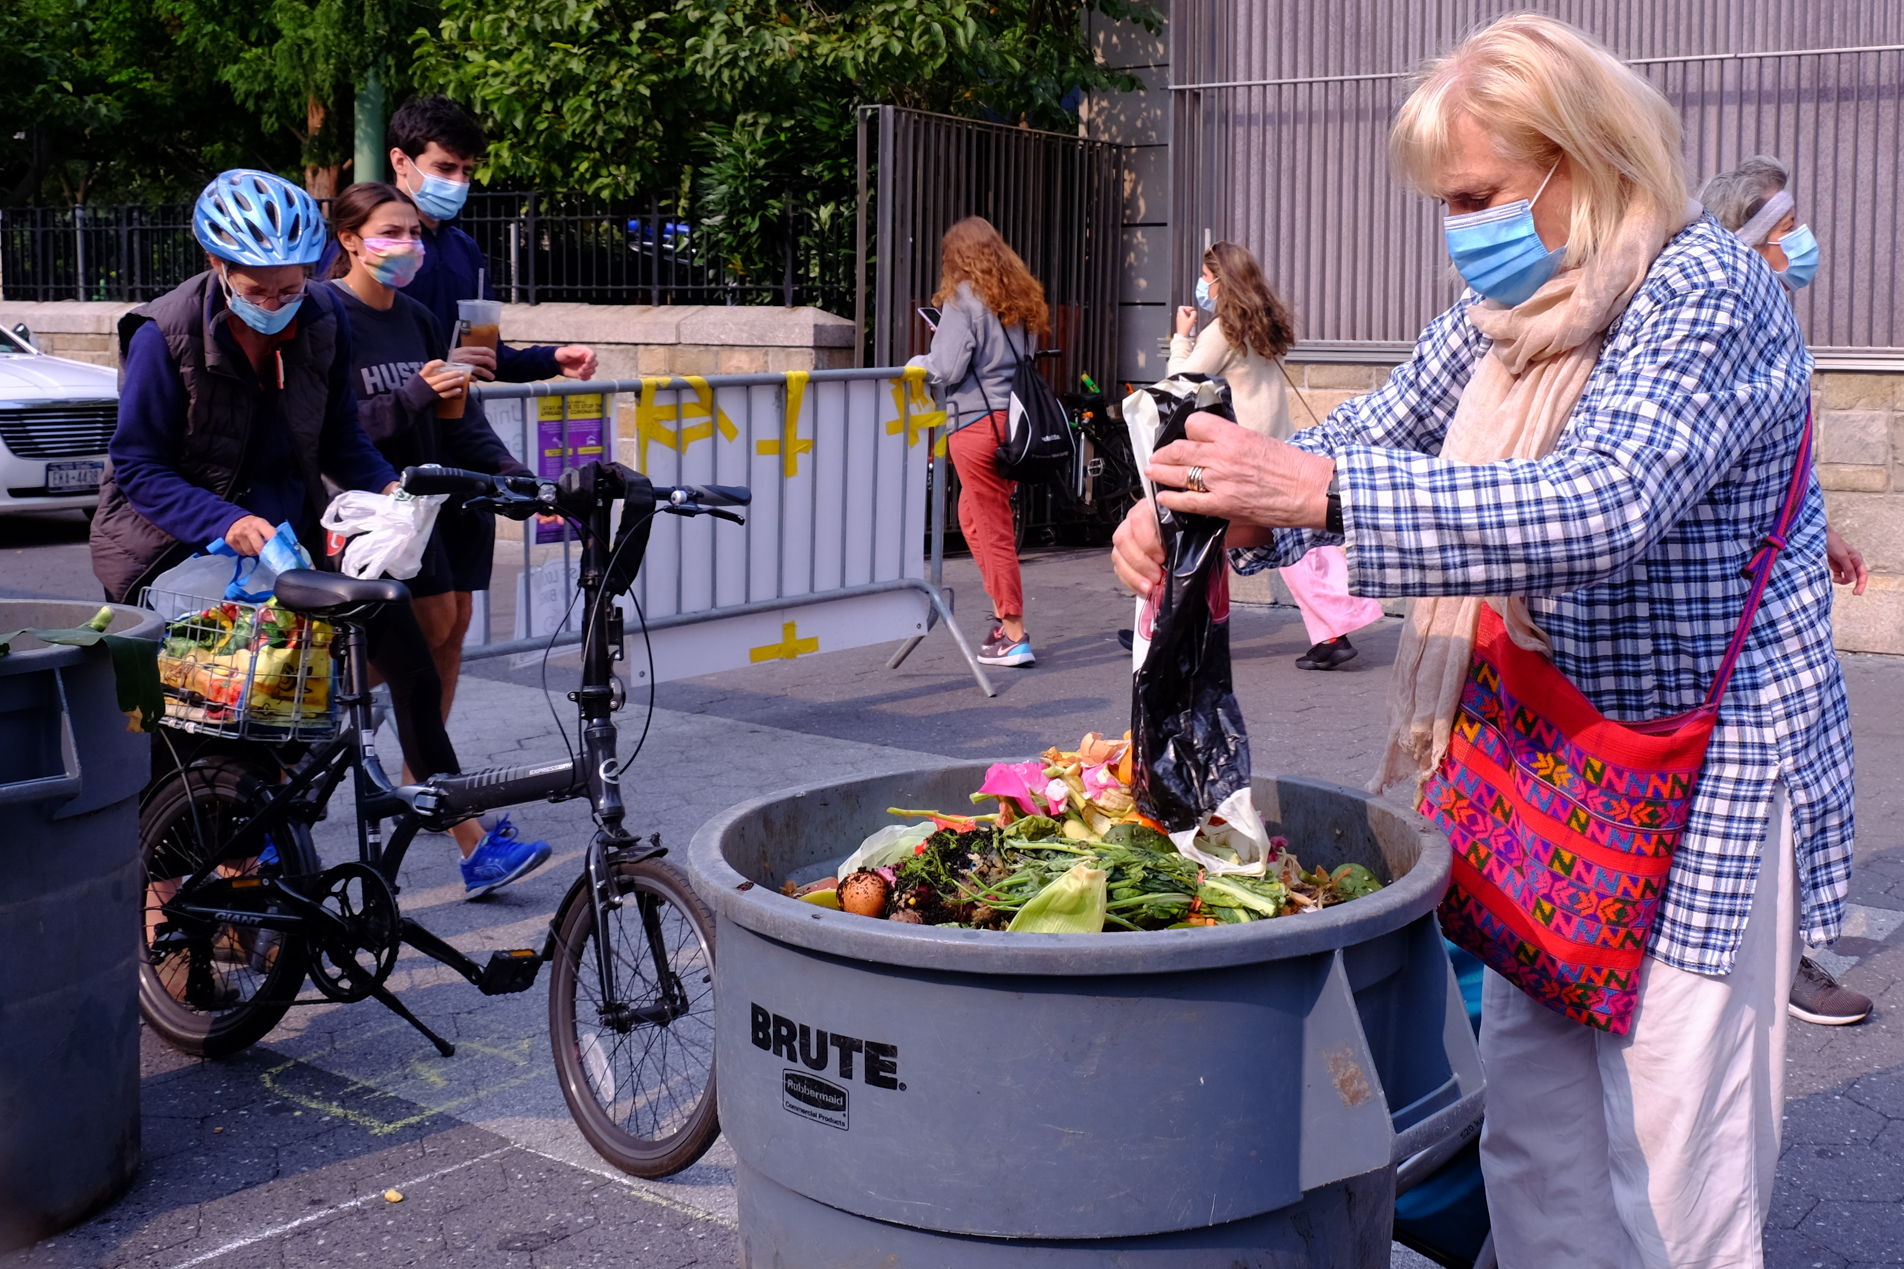 Compost is brought to drop-off by bicycle, foot, and shopping cart.